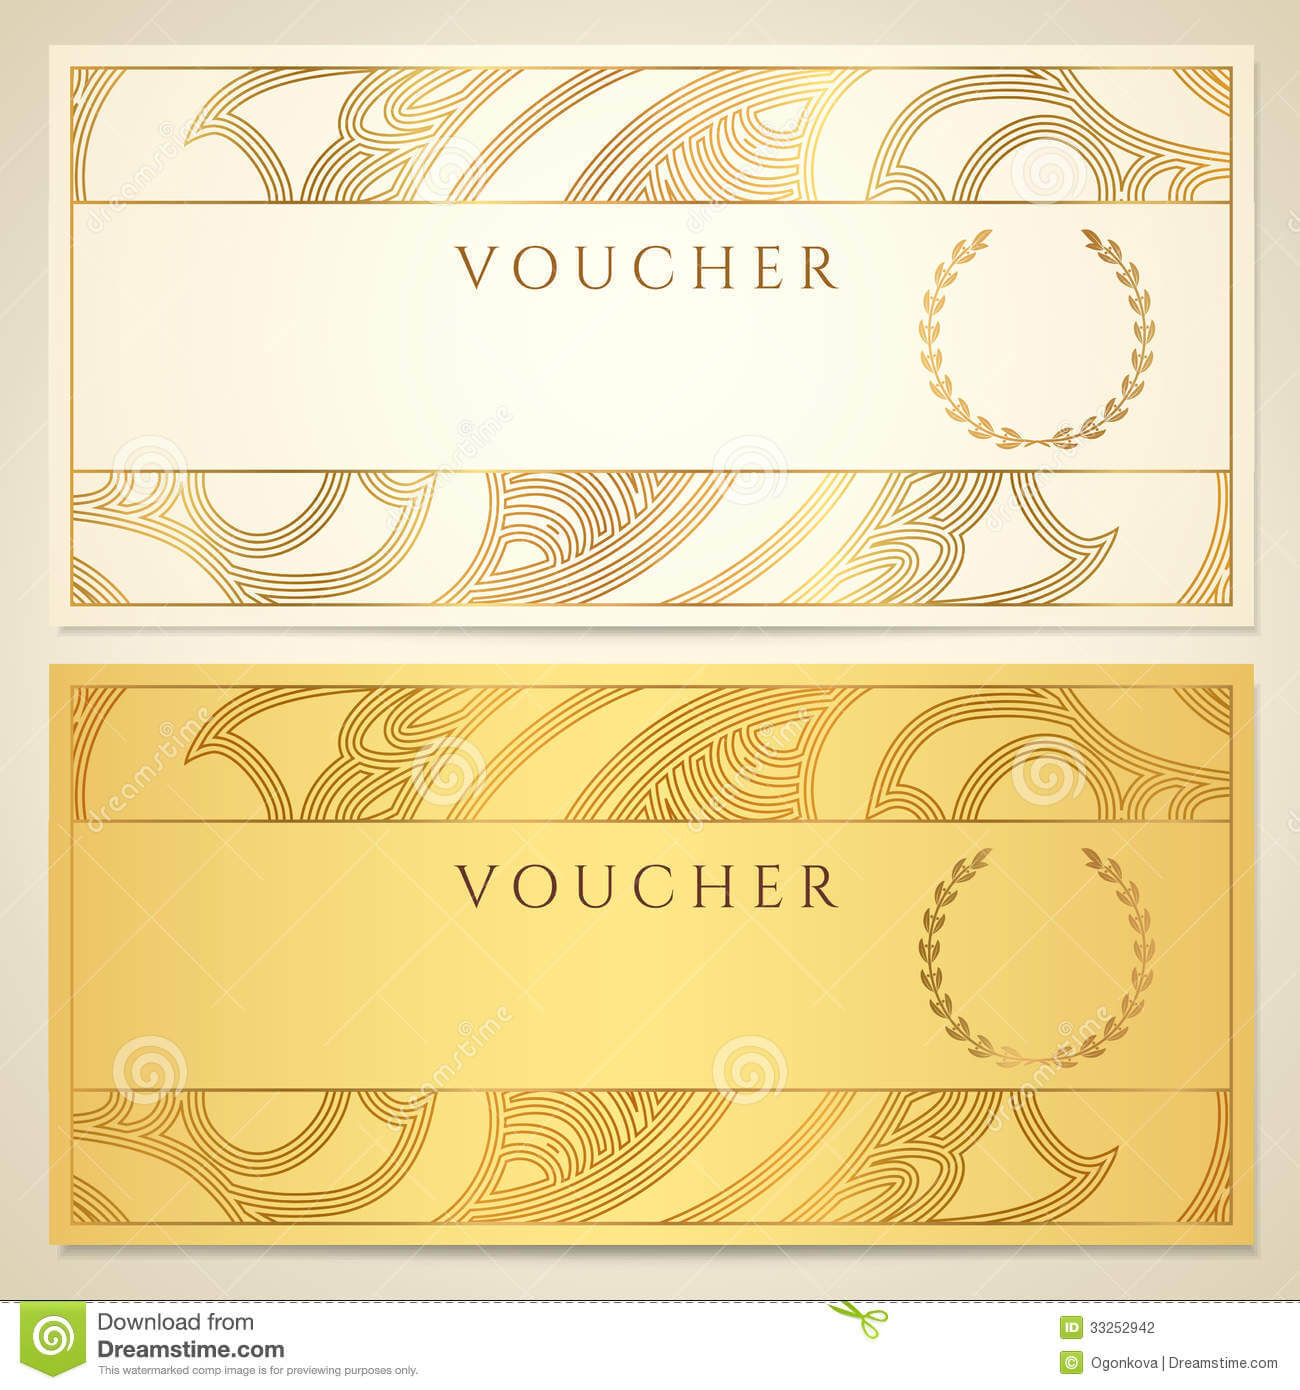 Voucher, Gift Certificate, Coupon Template. Stock Vector Within Certificate Scroll Template